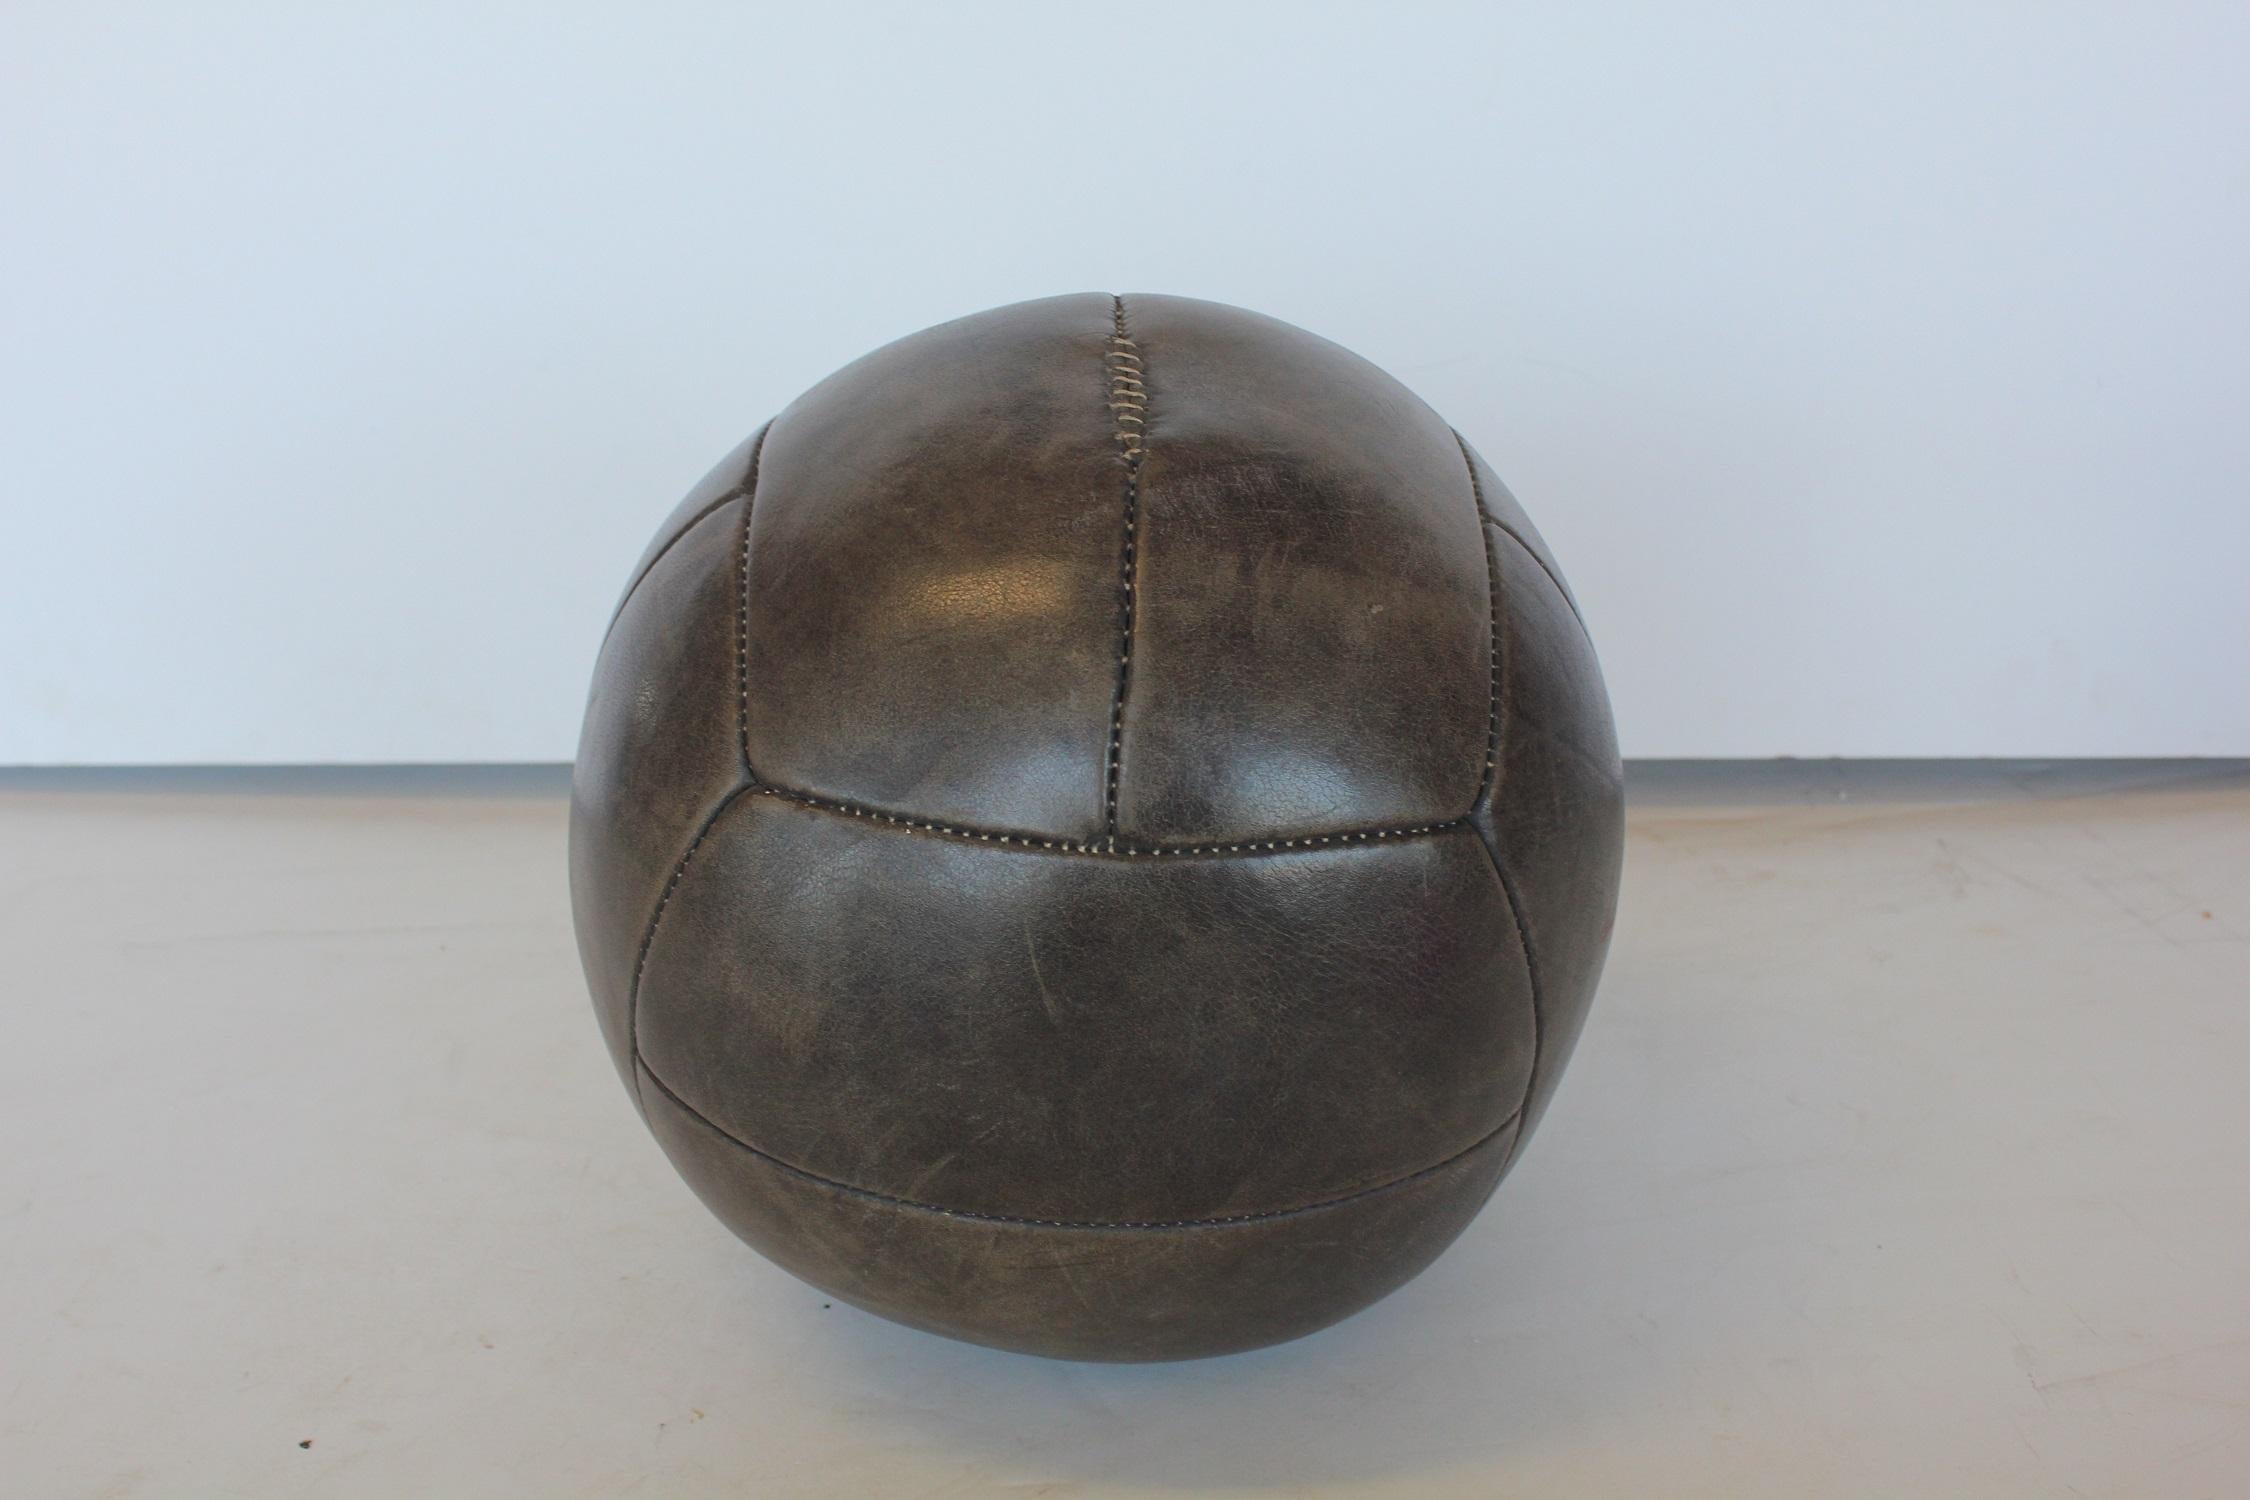 Sporting Art Large Vintage Hand-Stitched Leather Medicine Ball For Sale